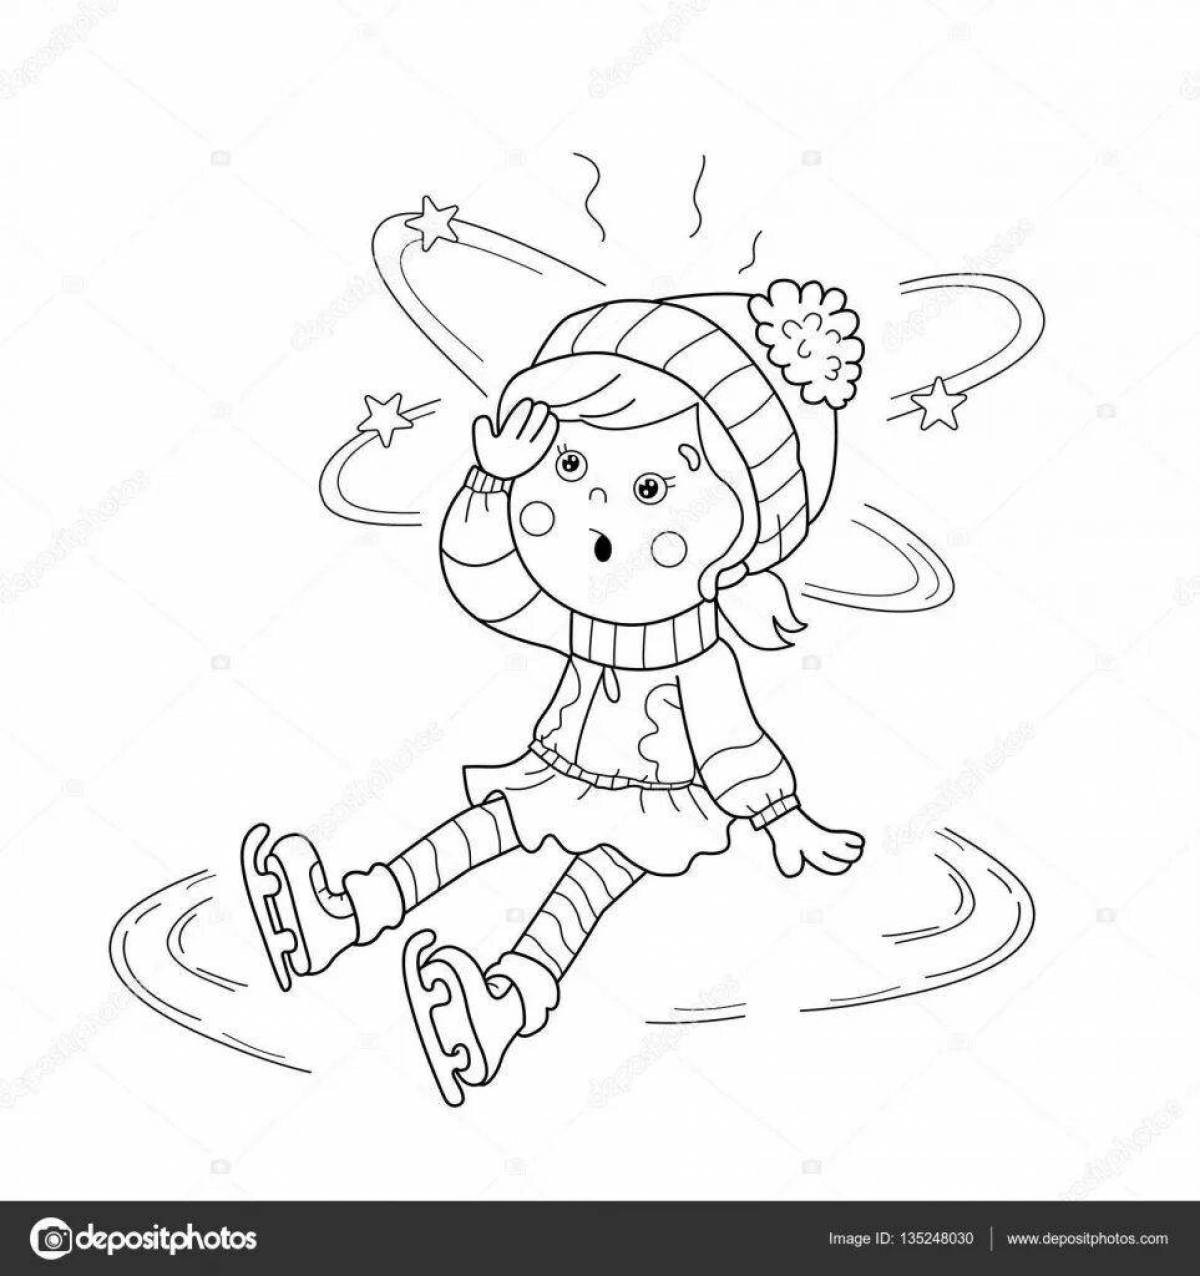 Playful ice rink coloring page